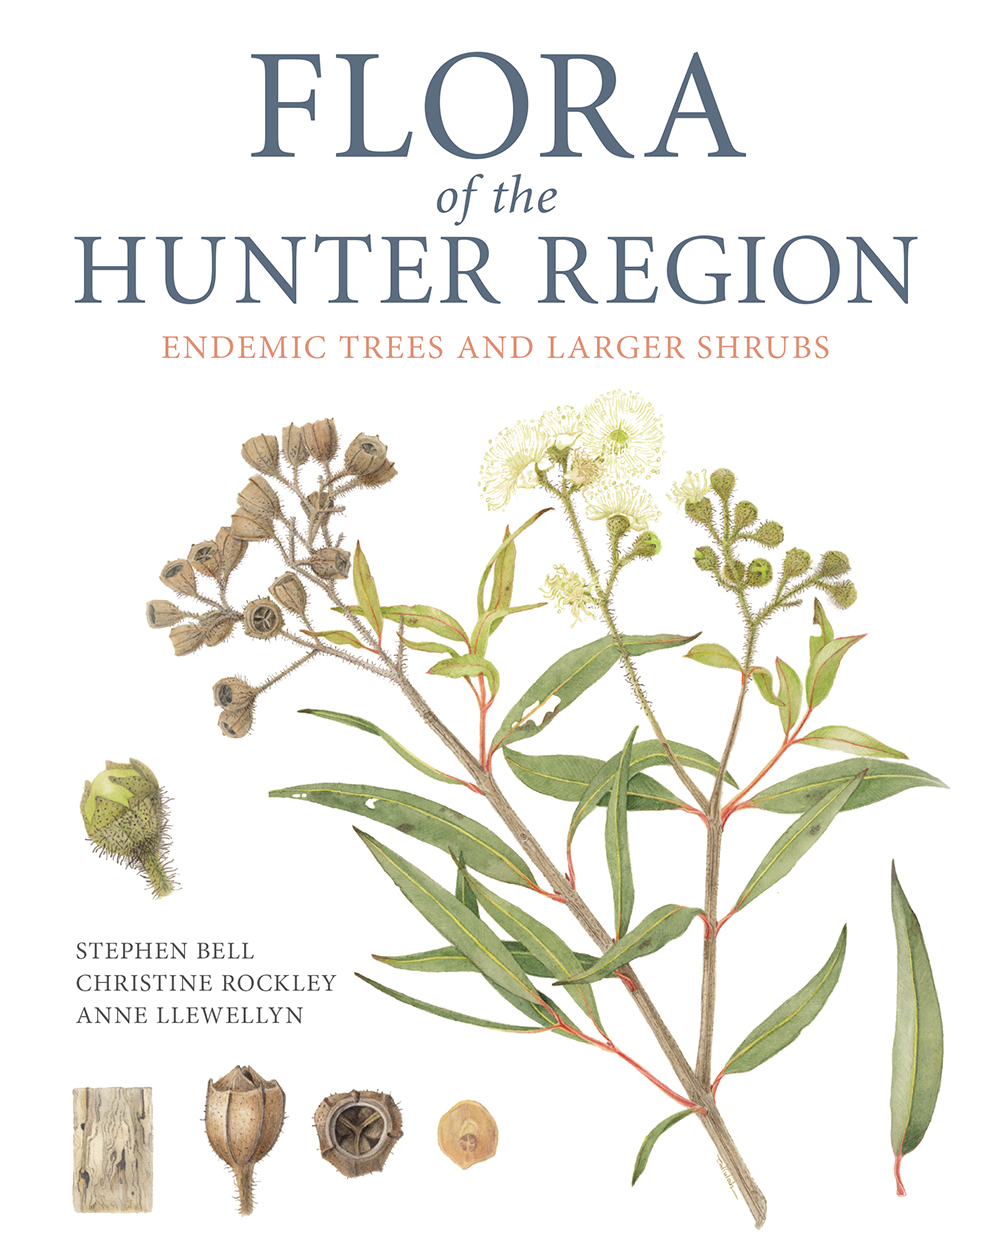 Cover of Flora of the Hunter Region featuring botanical illustrations of Angophora inopina leaves, flowers and gumnuts